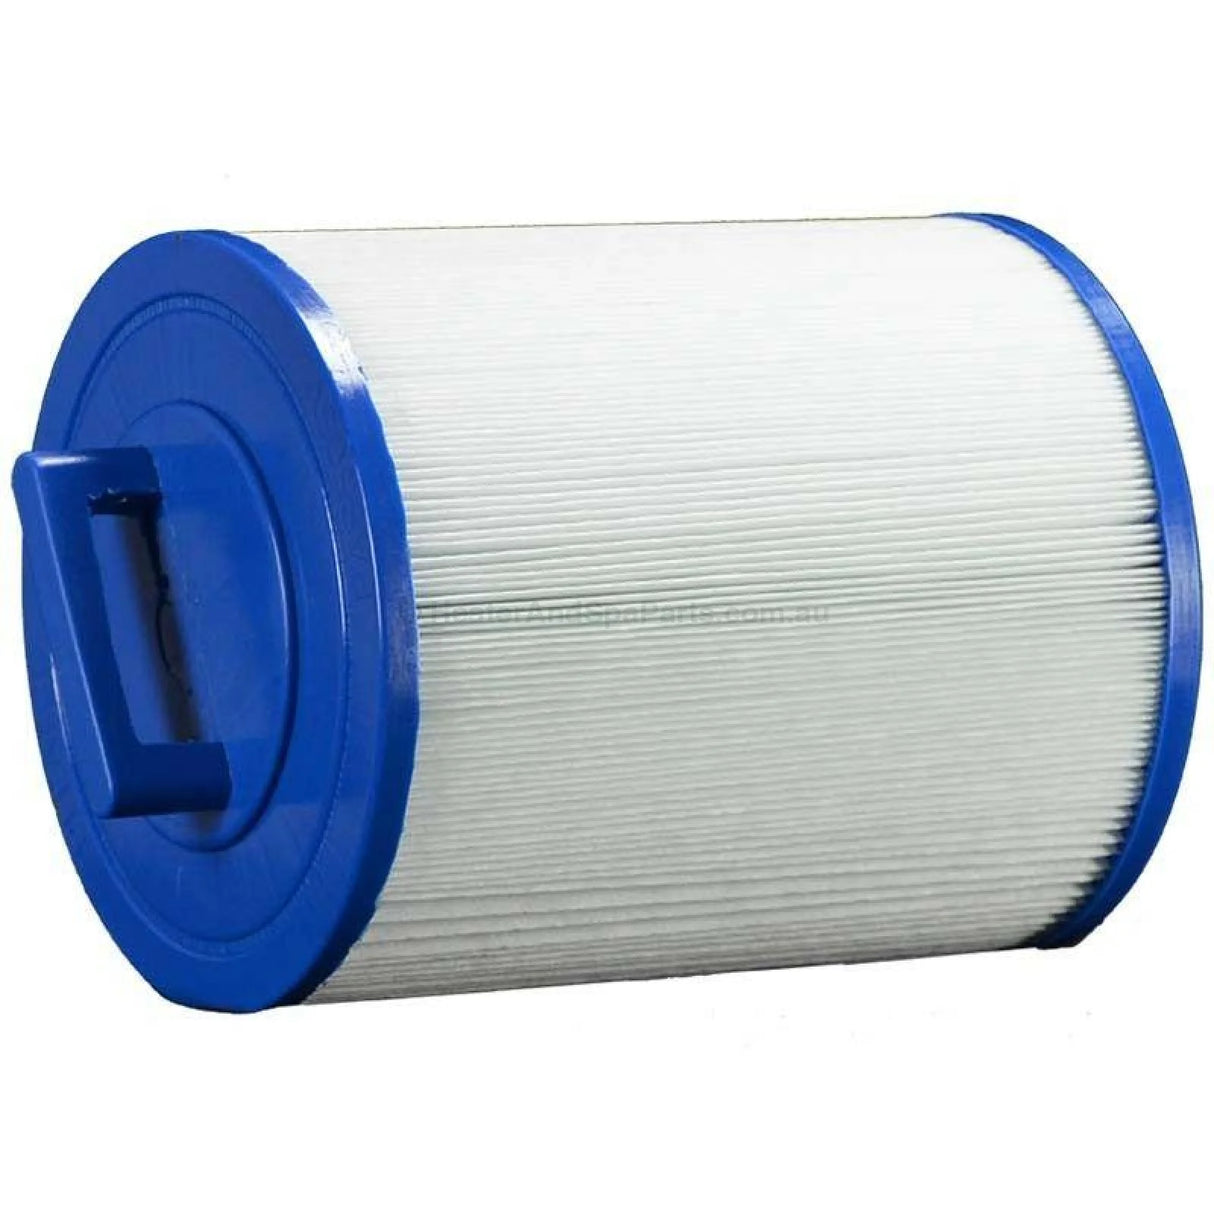 205mm Artesian Spas C50 Pleated Filter Cartridge - 50 sqft - PAS50SV 109518 - Heater and Spa Parts